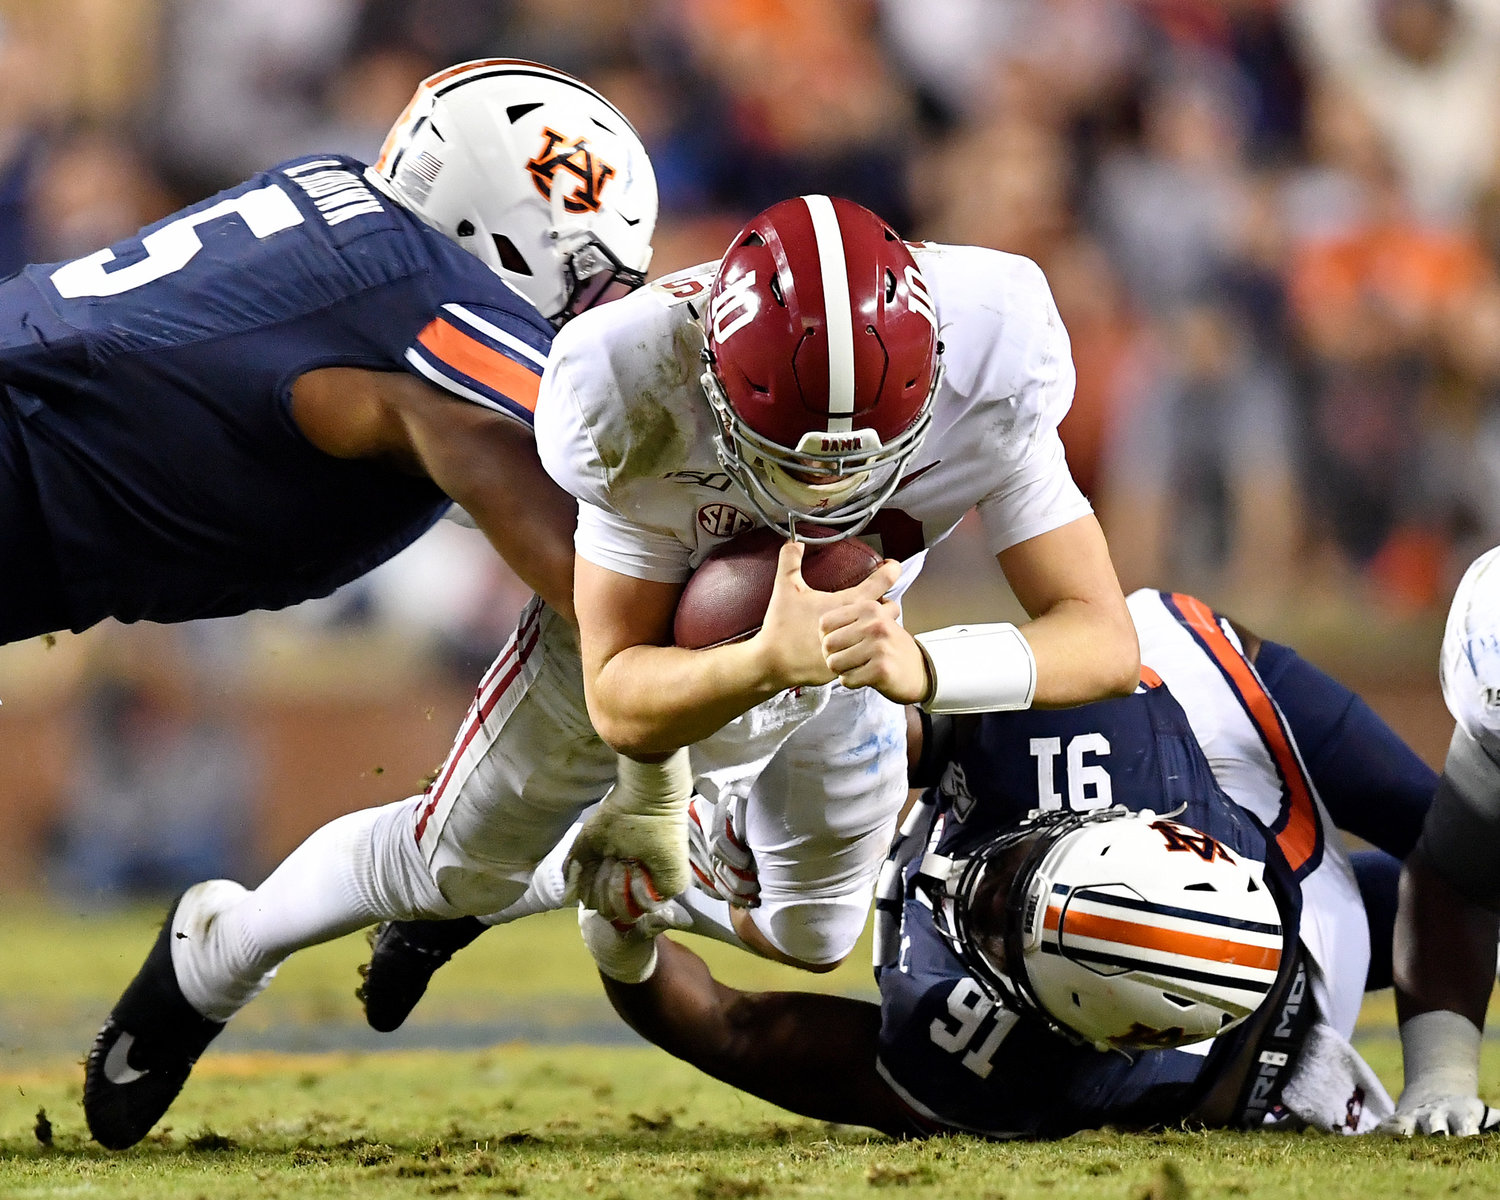 Alabama Crimson Tide quarterback Mac Jones (10) is tackled as he tries to get a first down during the second half of an NCAA football game against the Auburn Tigers Saturday, Nov. 30, 2019, at Jordan-Hare Stadium in Auburn, Ala.